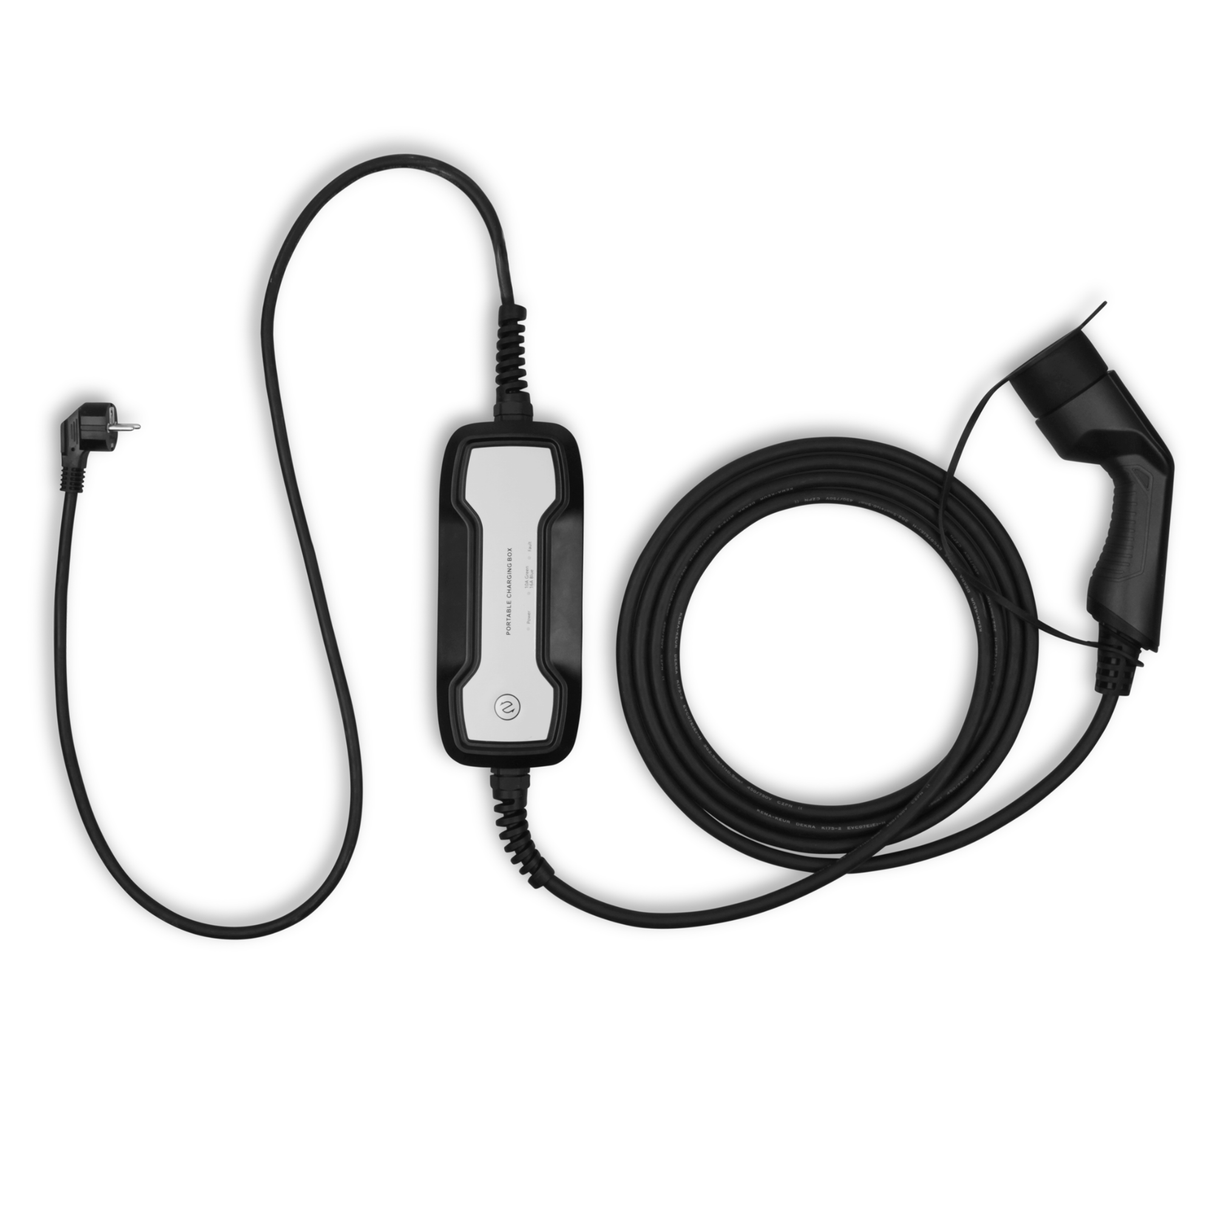 Mobile charger DS 9 - Besen - Type 2 to Schuko